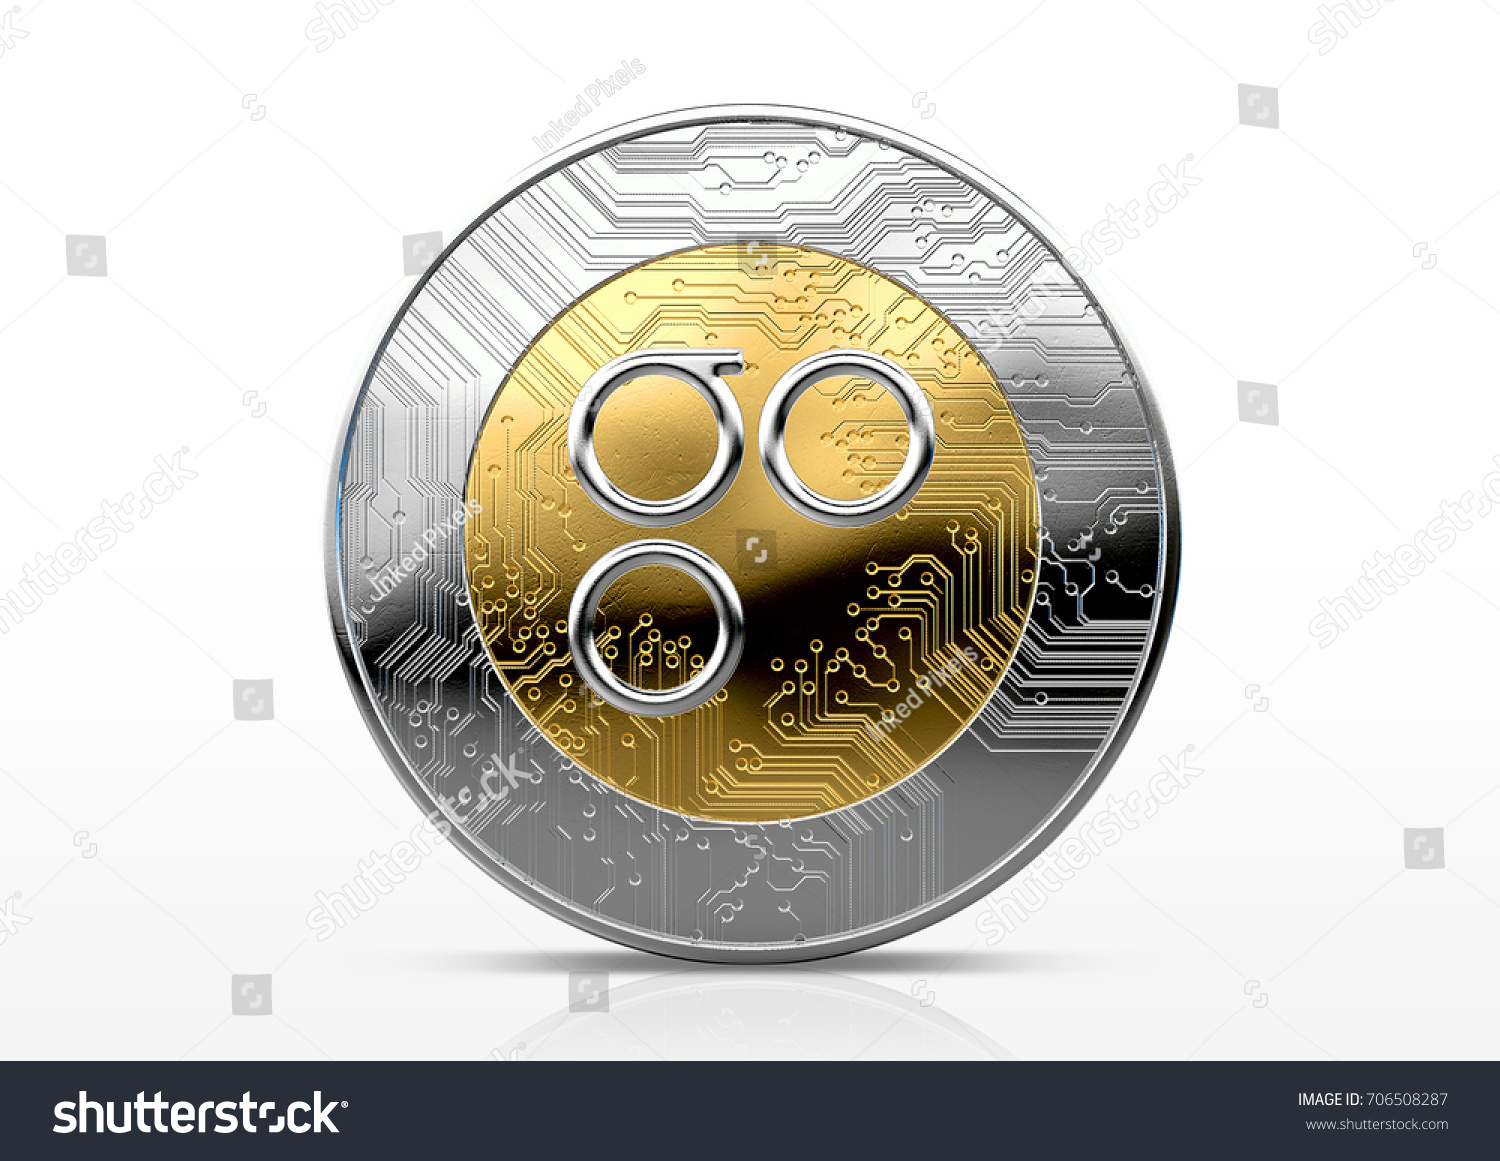 stock-photo-a-omisego-physical-cryptocurrency-in-gold-and-silver-coin-form-on-a-dark-studio-background-d-706508287.jpg